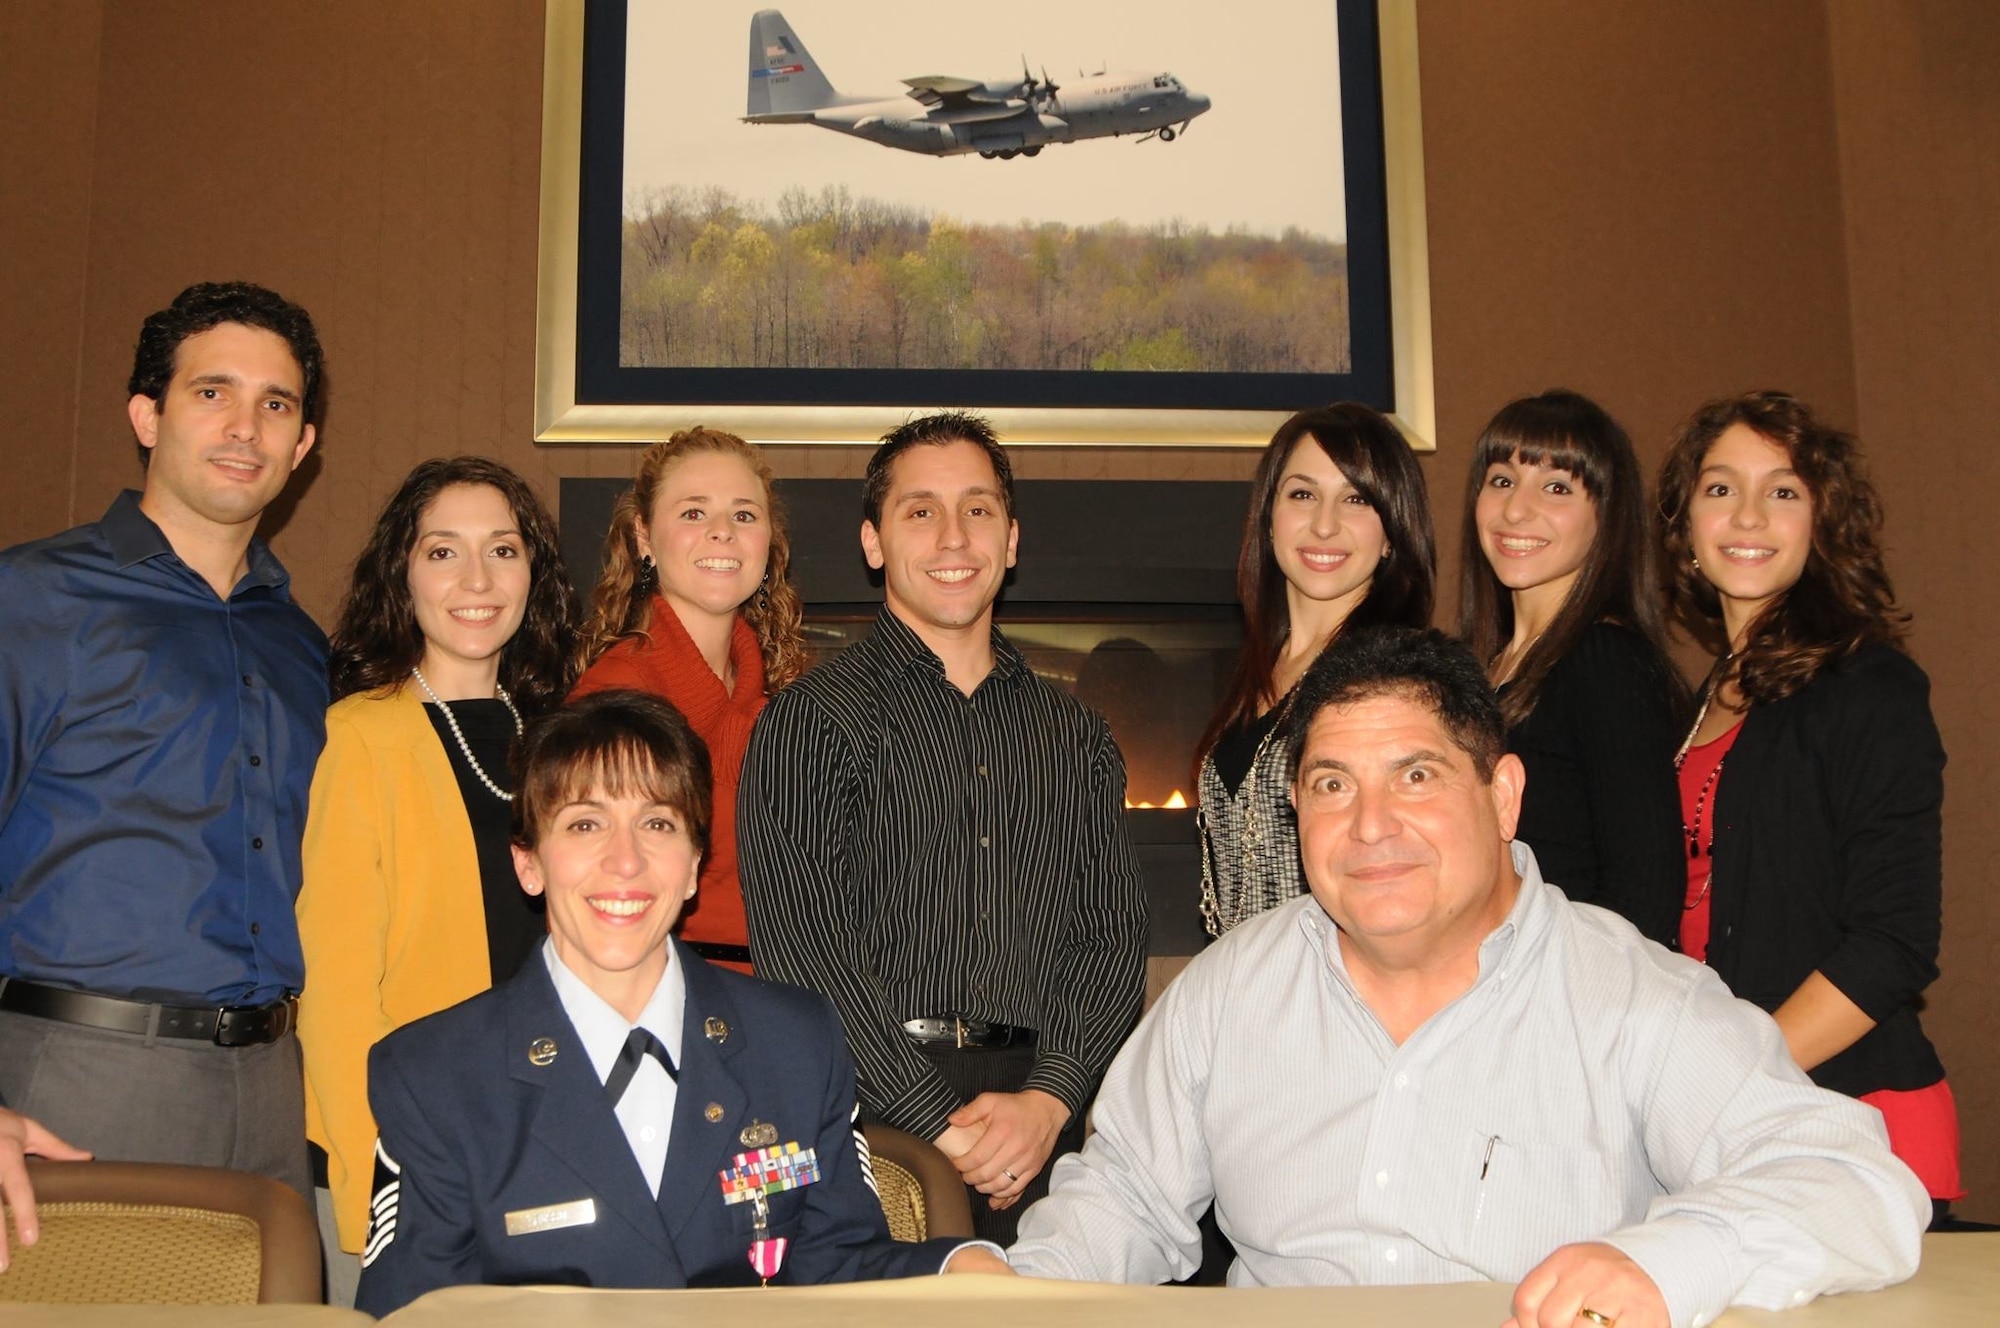 Master Sgt. Anna Marie Russo, an administrative assistant to the 910th Airlift Wing commander, poses for a photo with her family on Nov. 17, 2013, at Youngstown Air Reserve Station. Russo retired after 33 years of service in the Air Force Reserve.